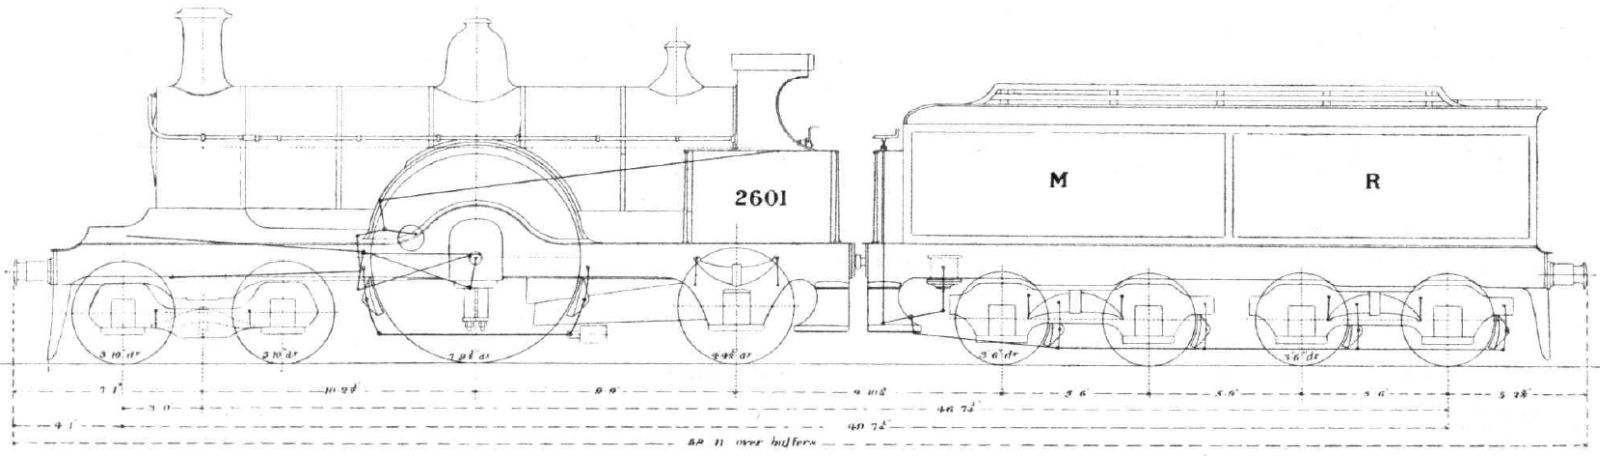 Schematic drawing of class 2601